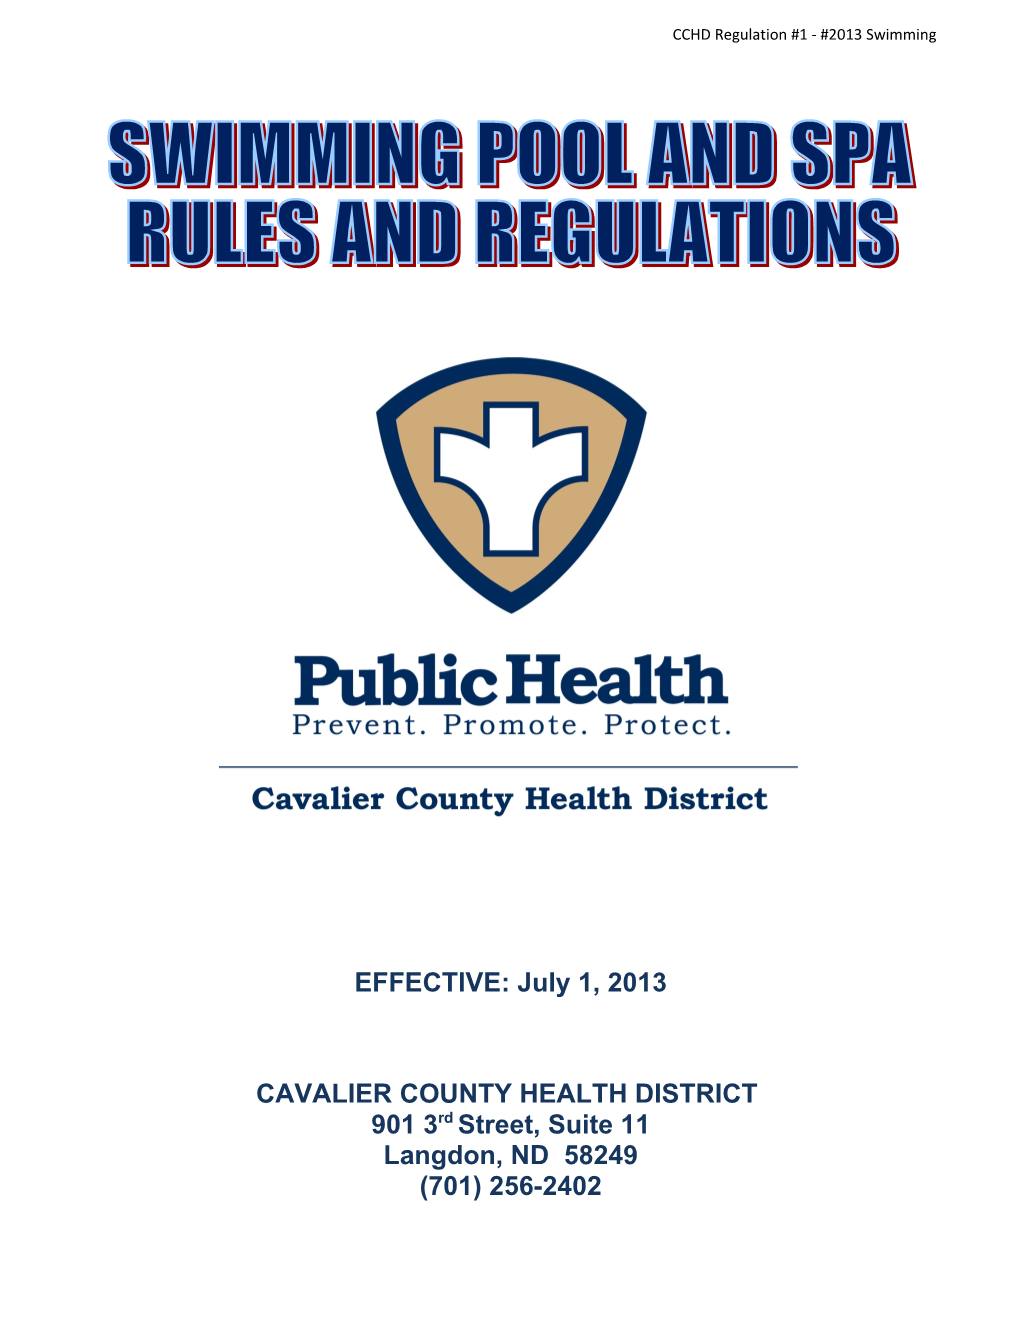 Cavalier County Health District